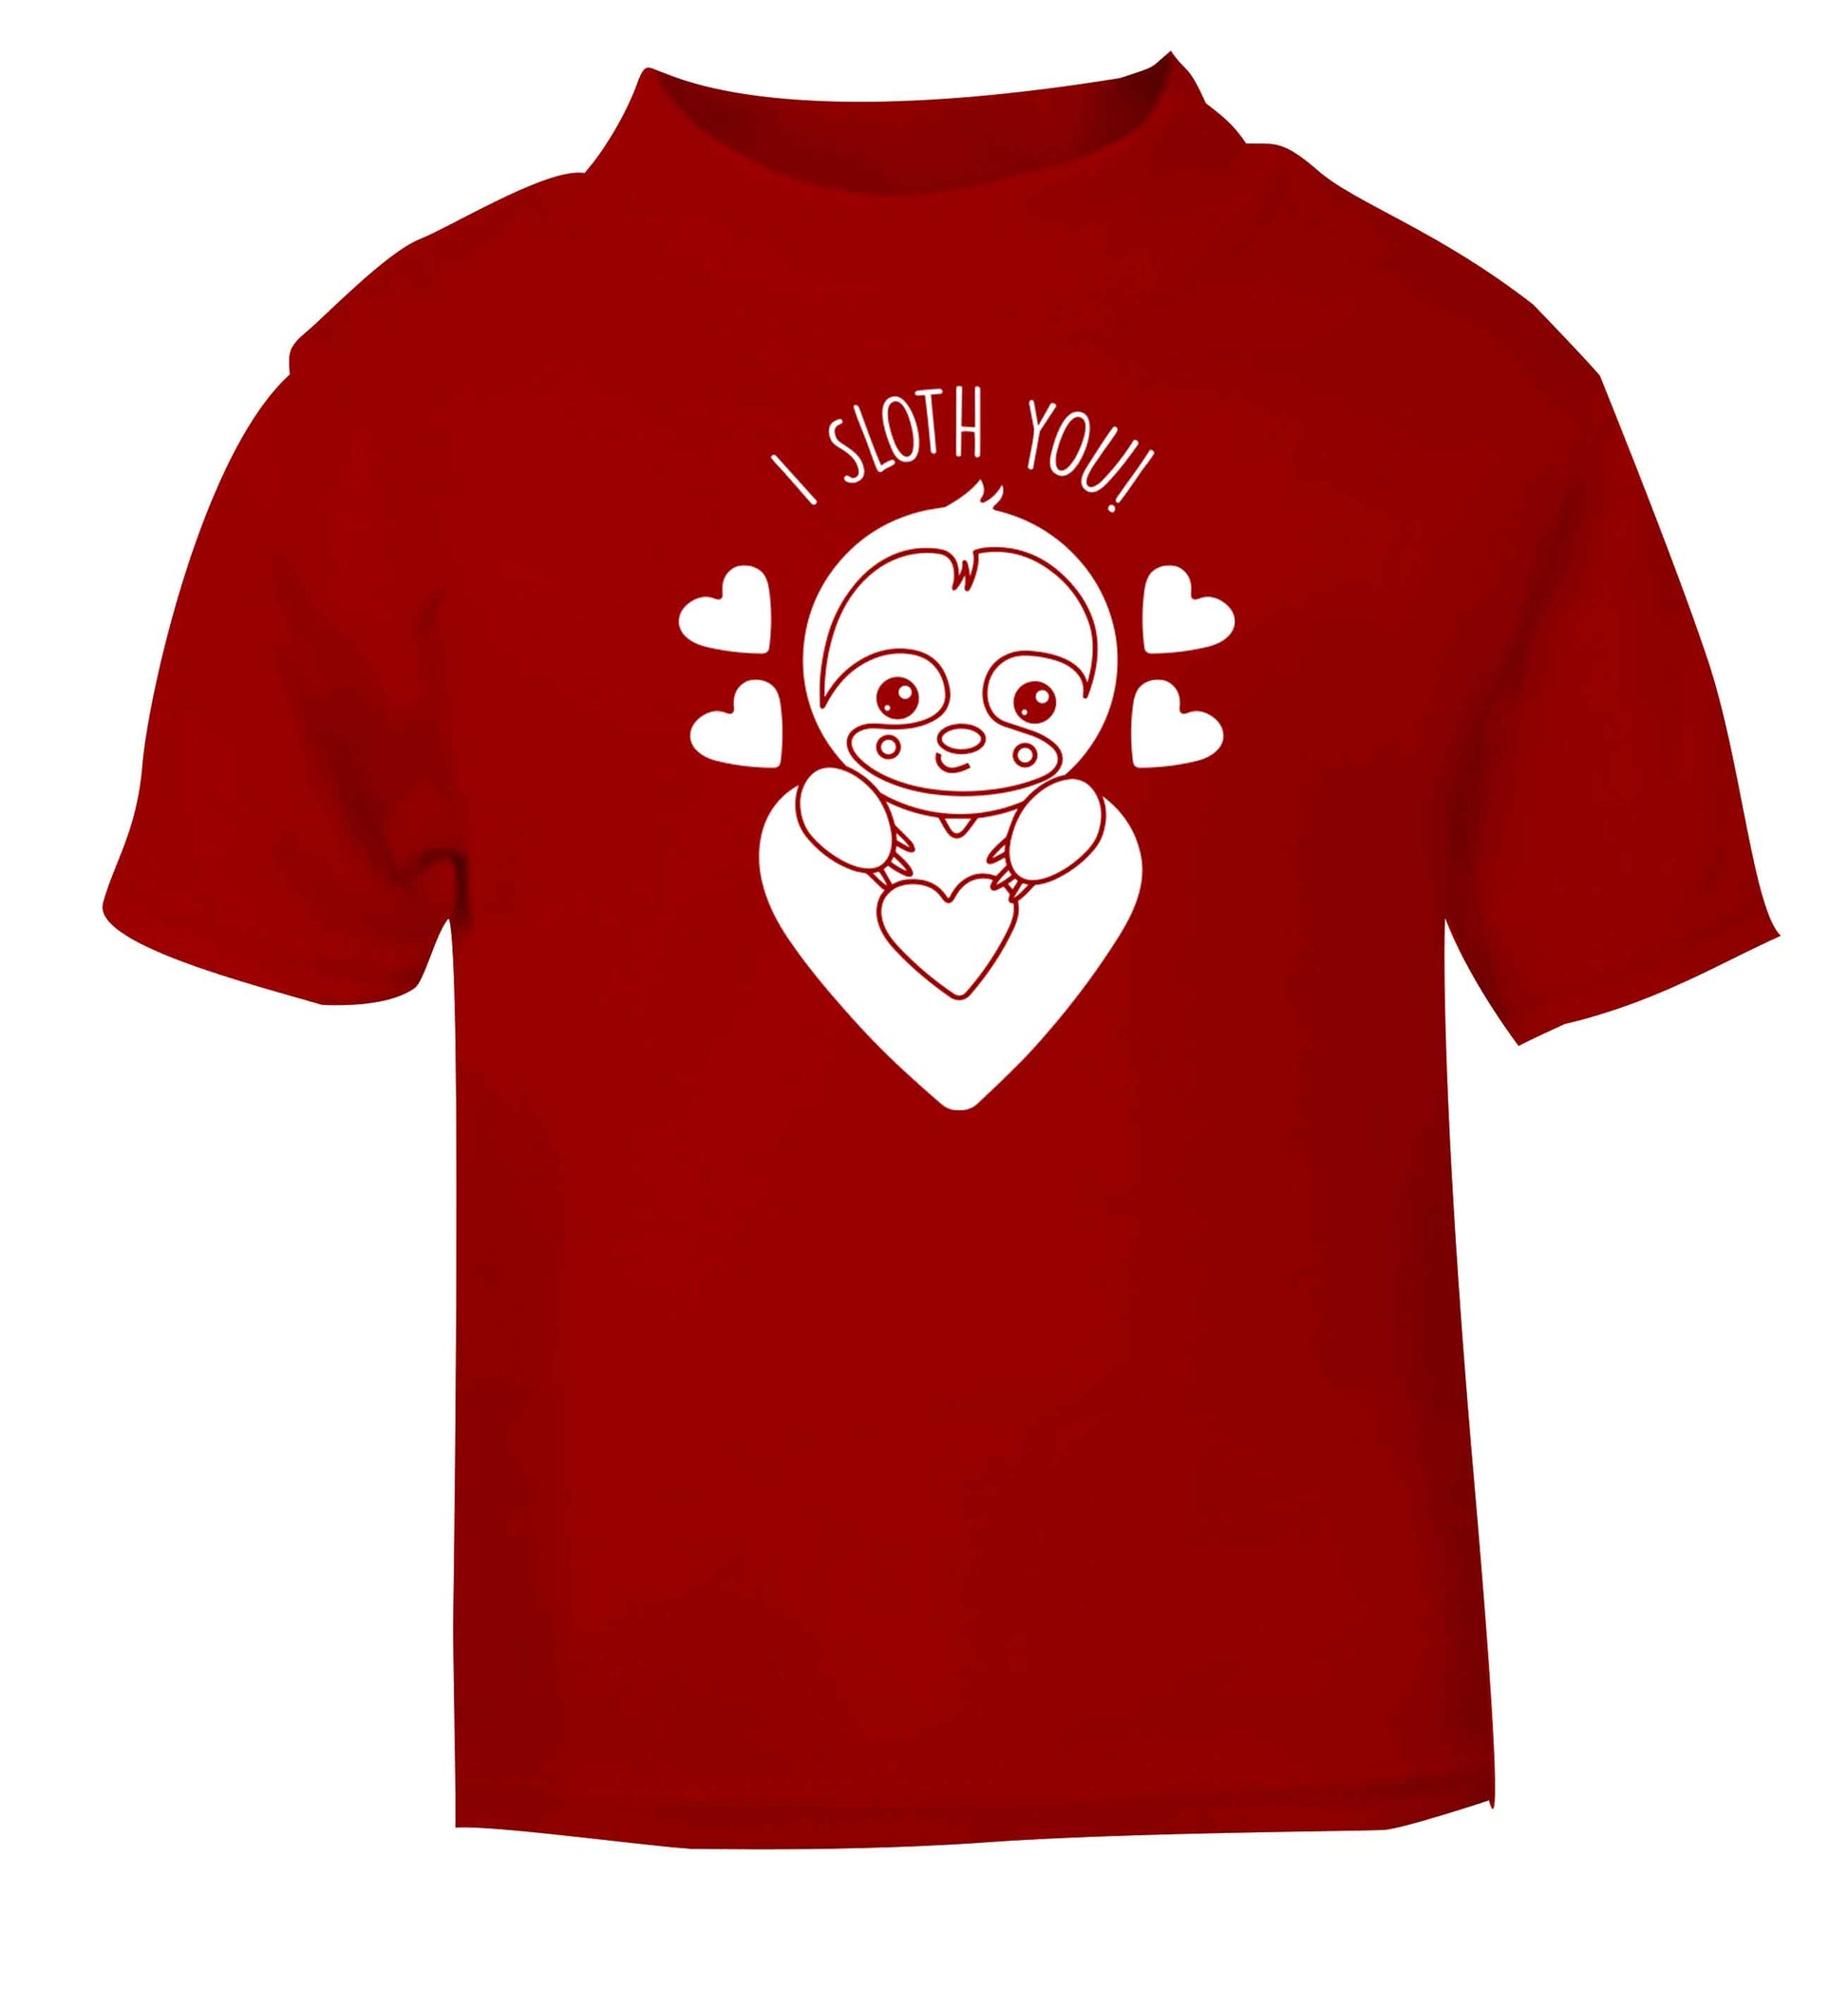 I sloth you red baby toddler Tshirt 2 Years